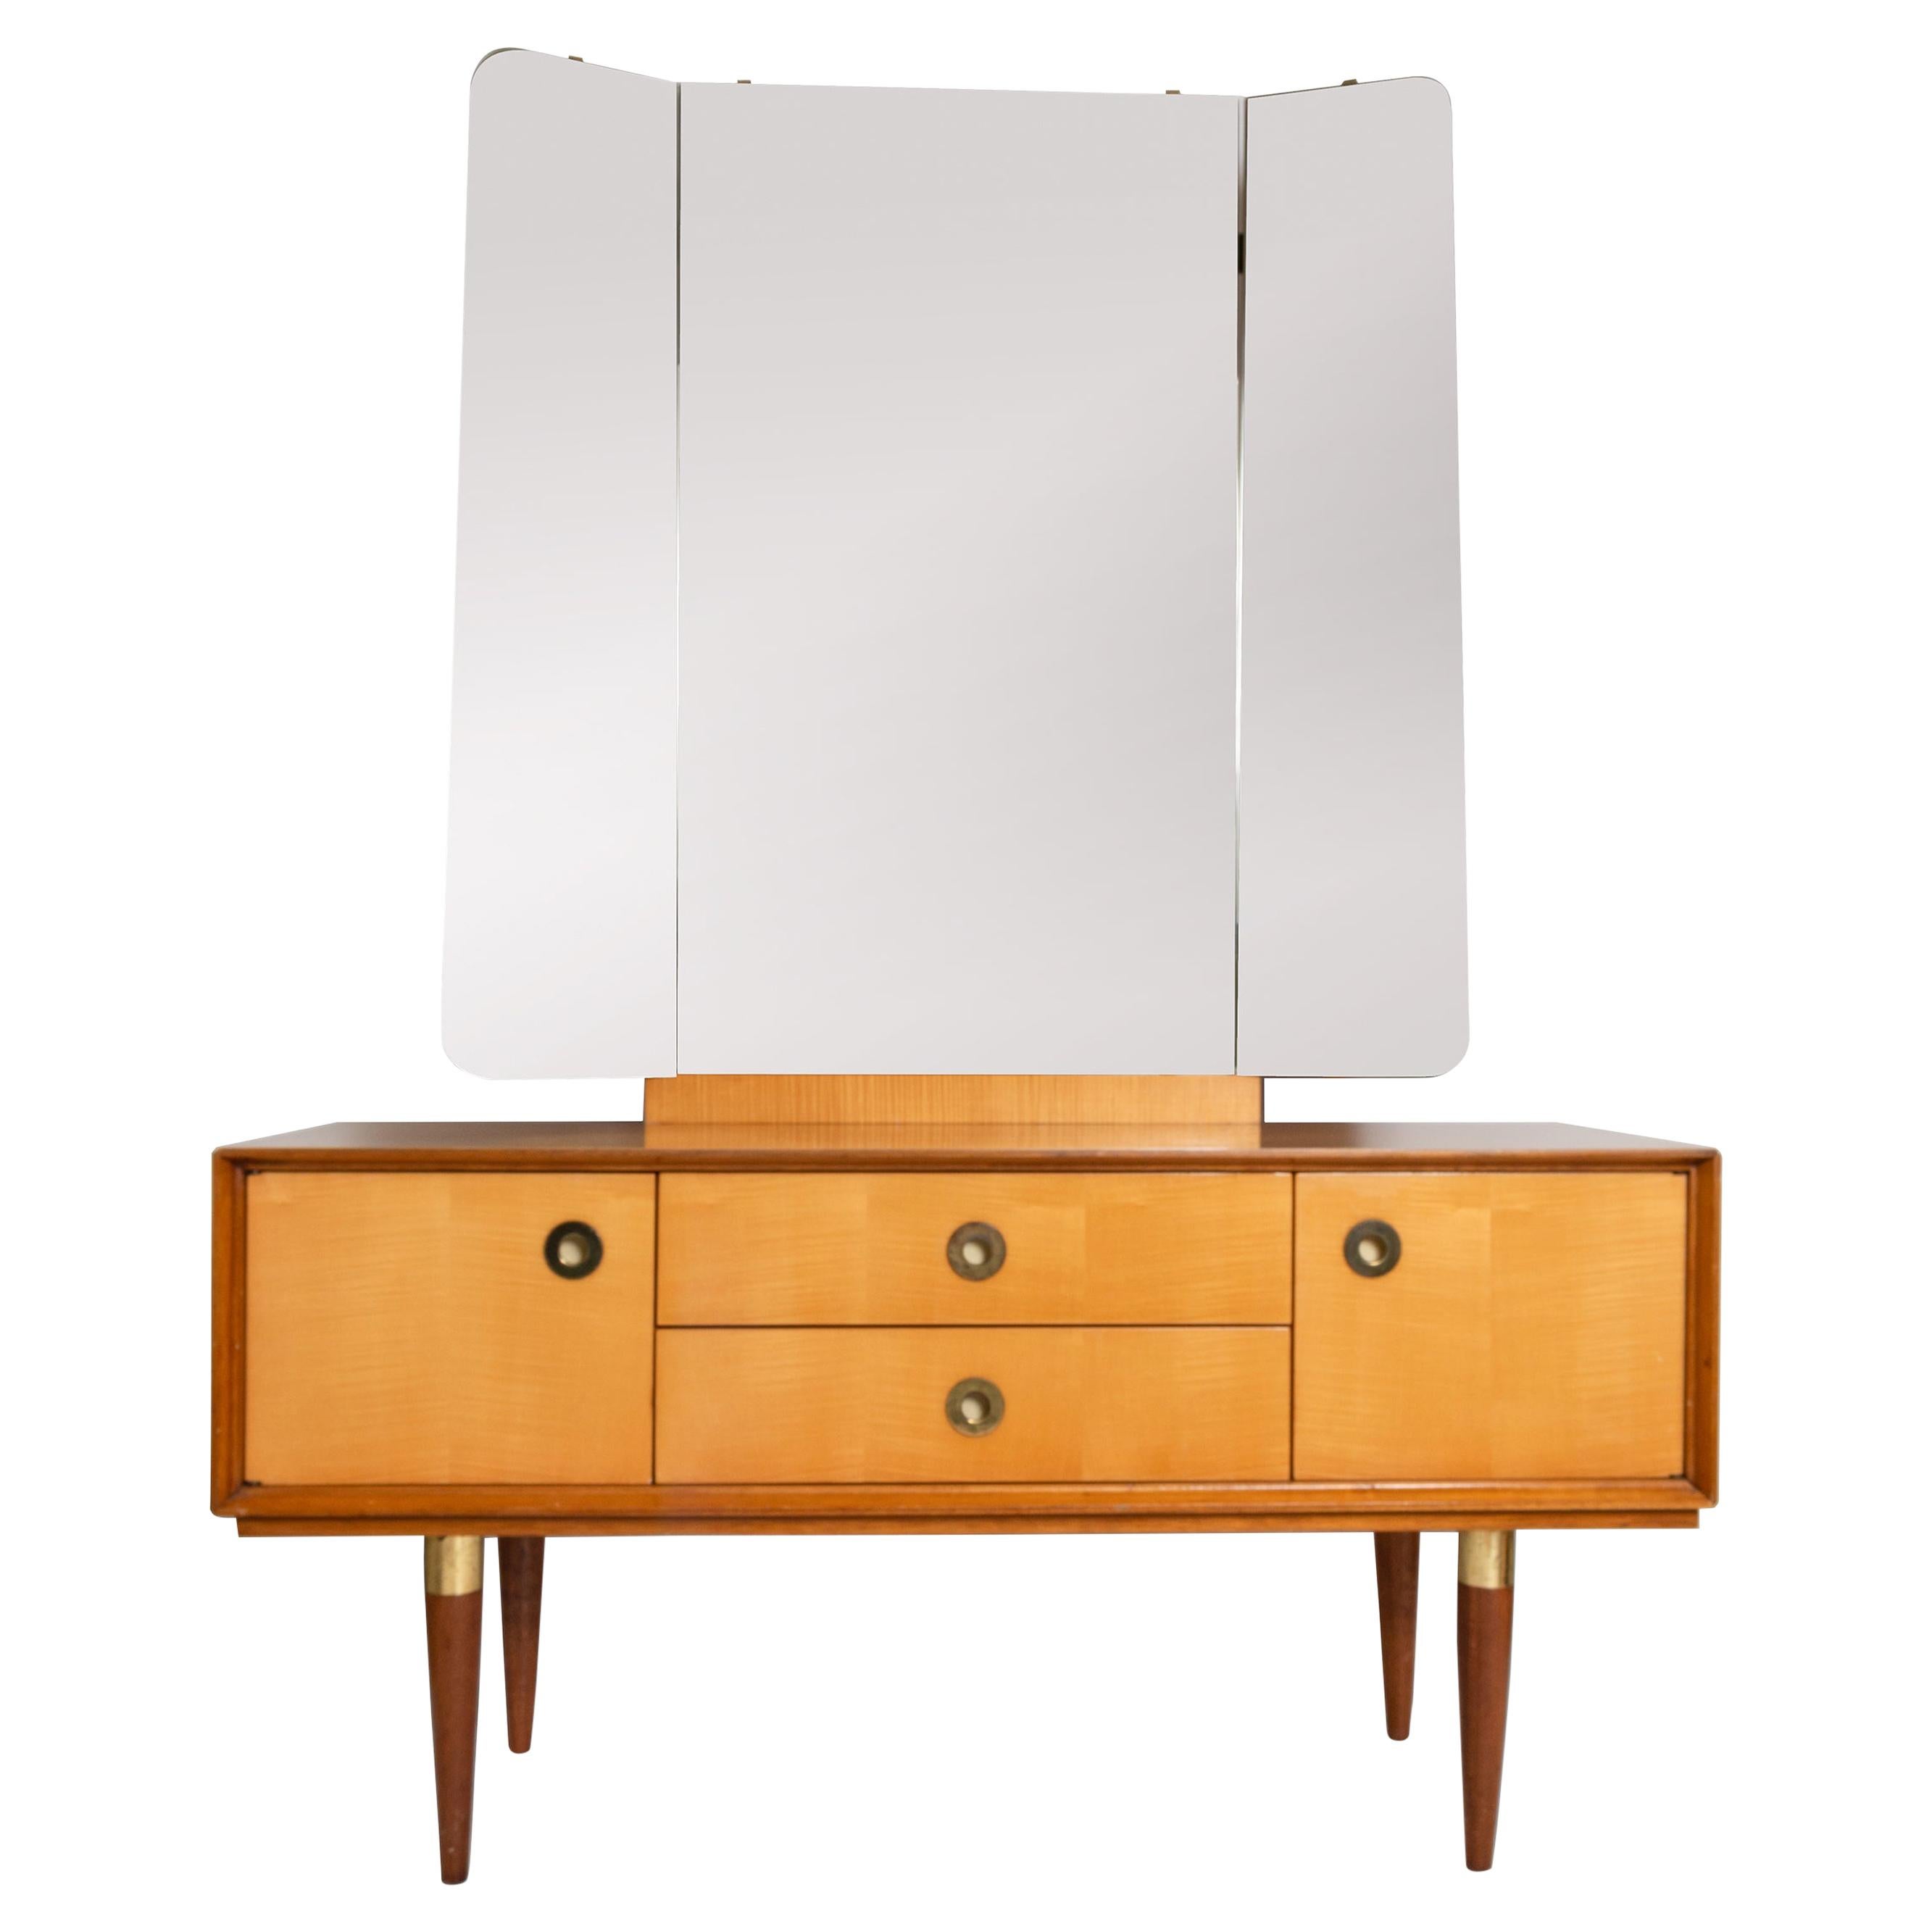 Midcentury Mirrored Dressing Table in Sycamore and Walnut, France, circa 1950